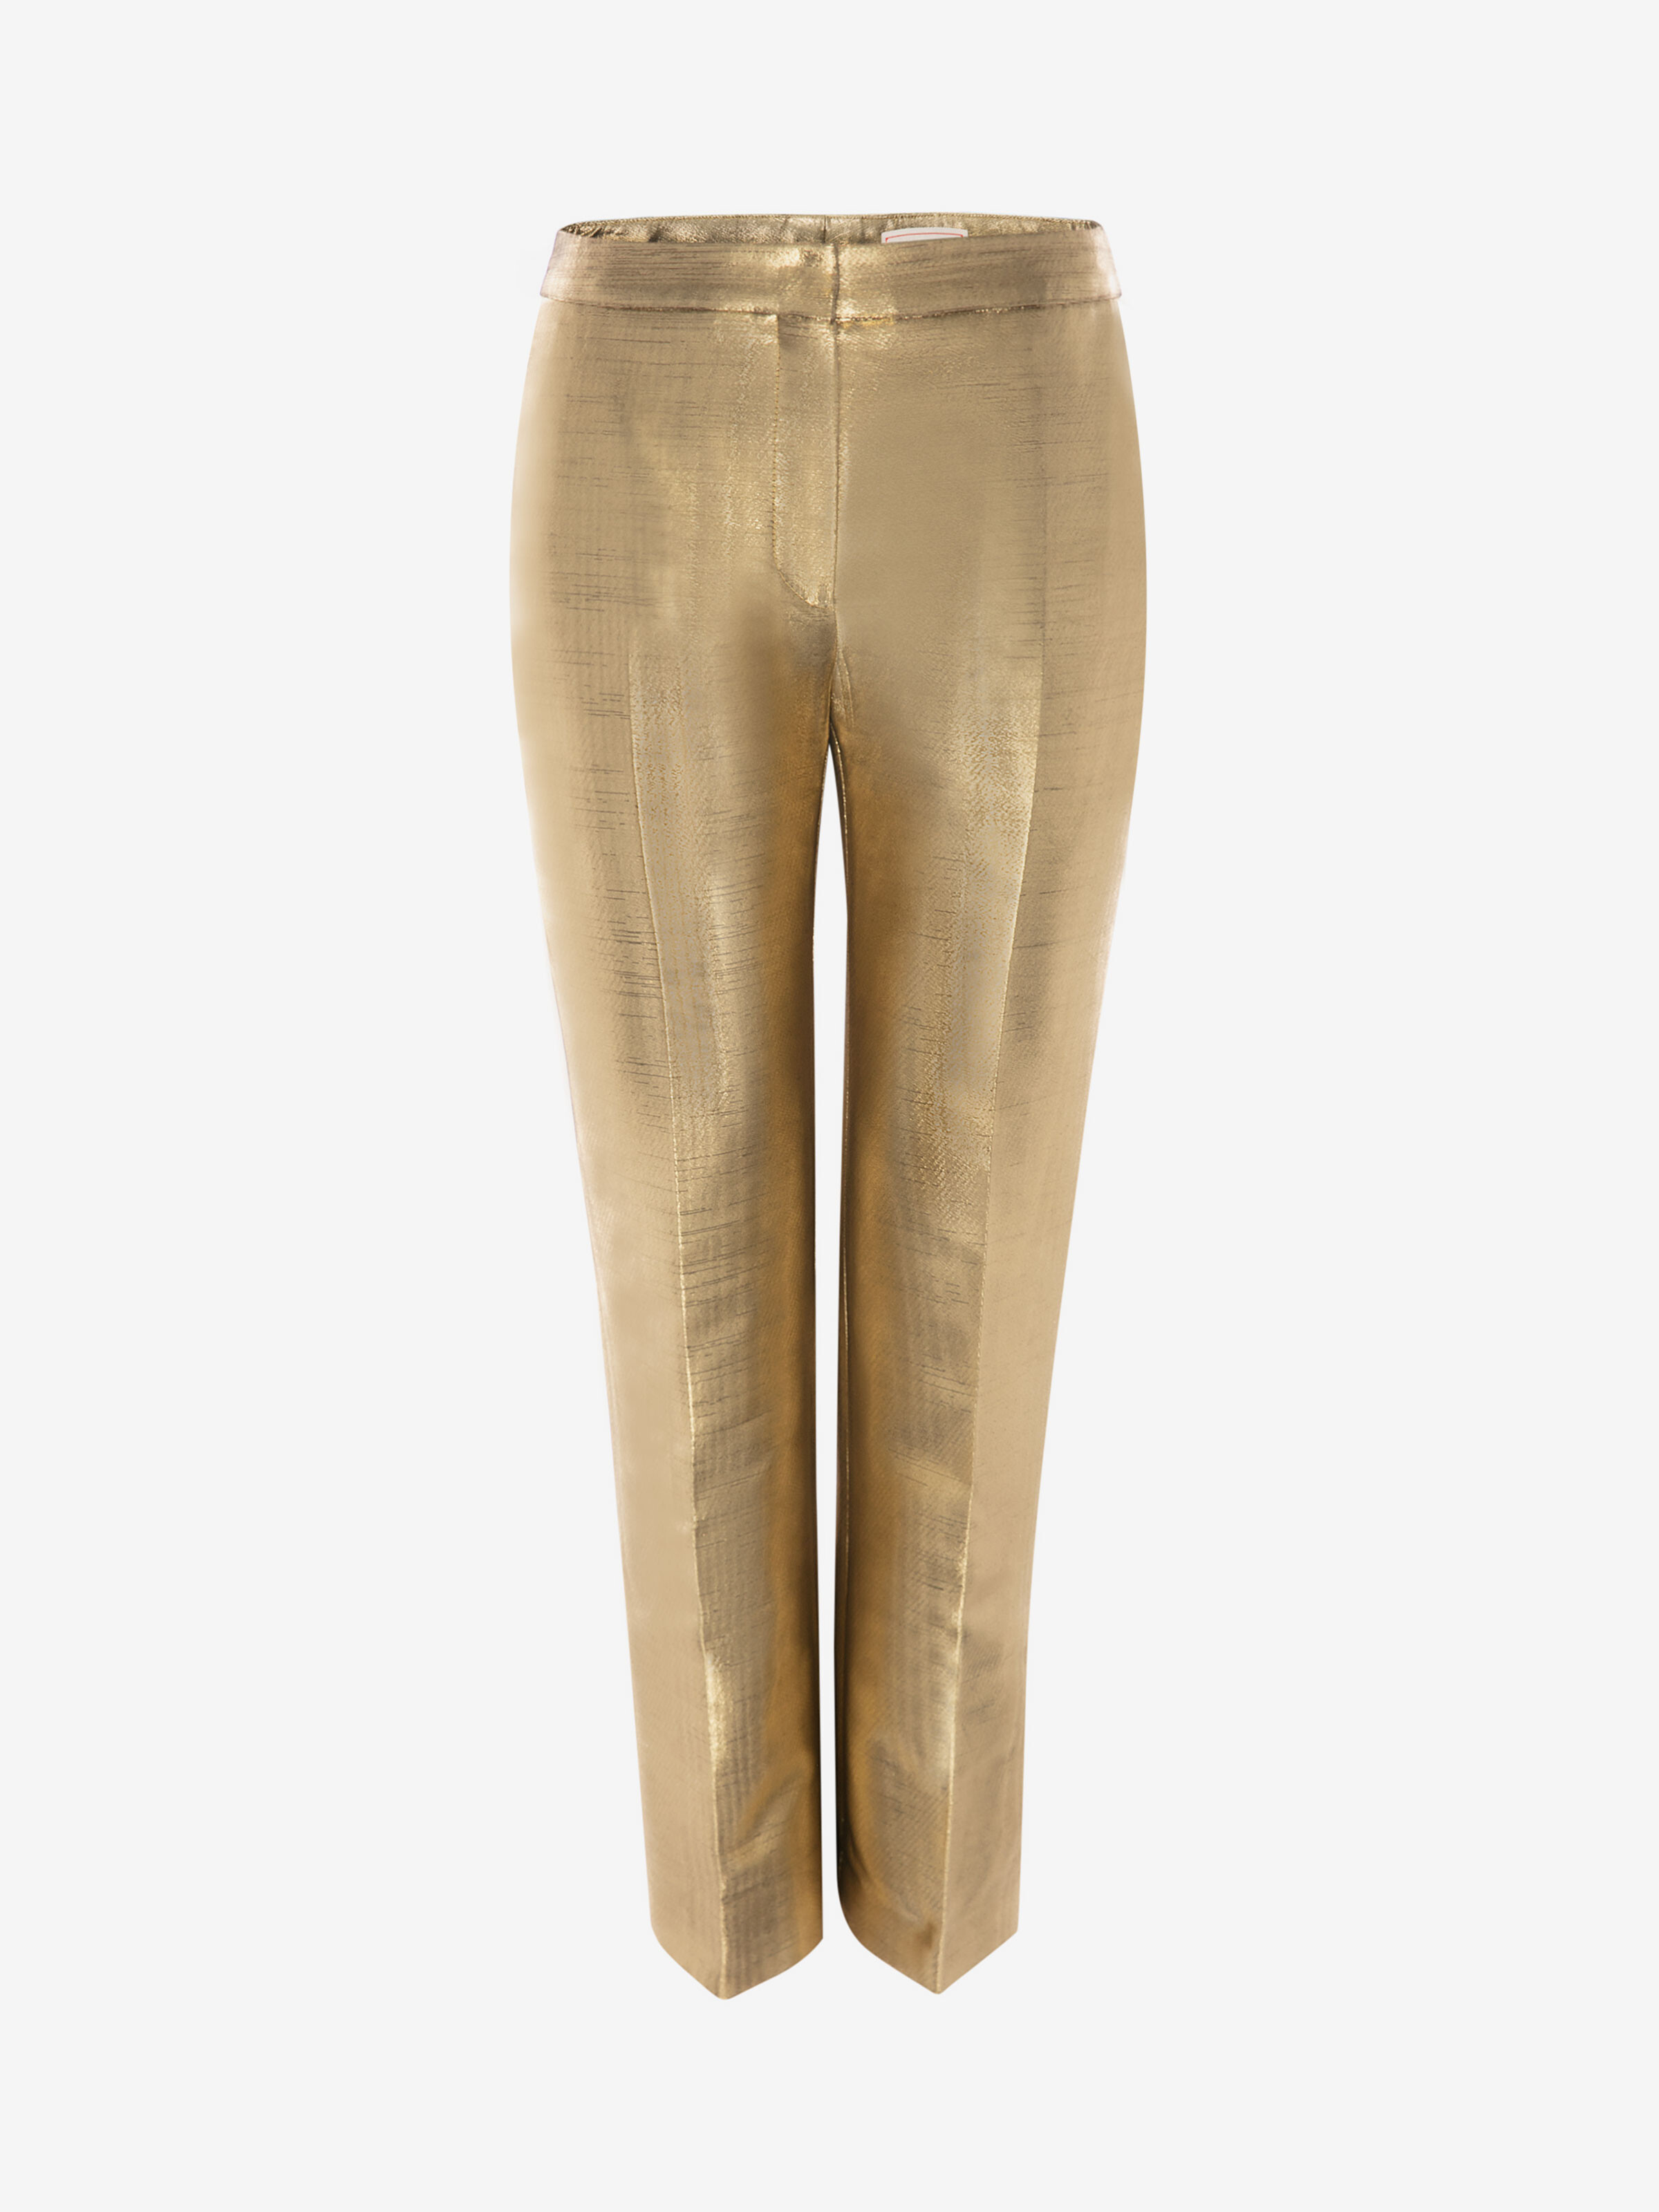 Missguided Gold Metallic Jacquard Cigarette Trousers, $54 | Missguided |  Lookastic